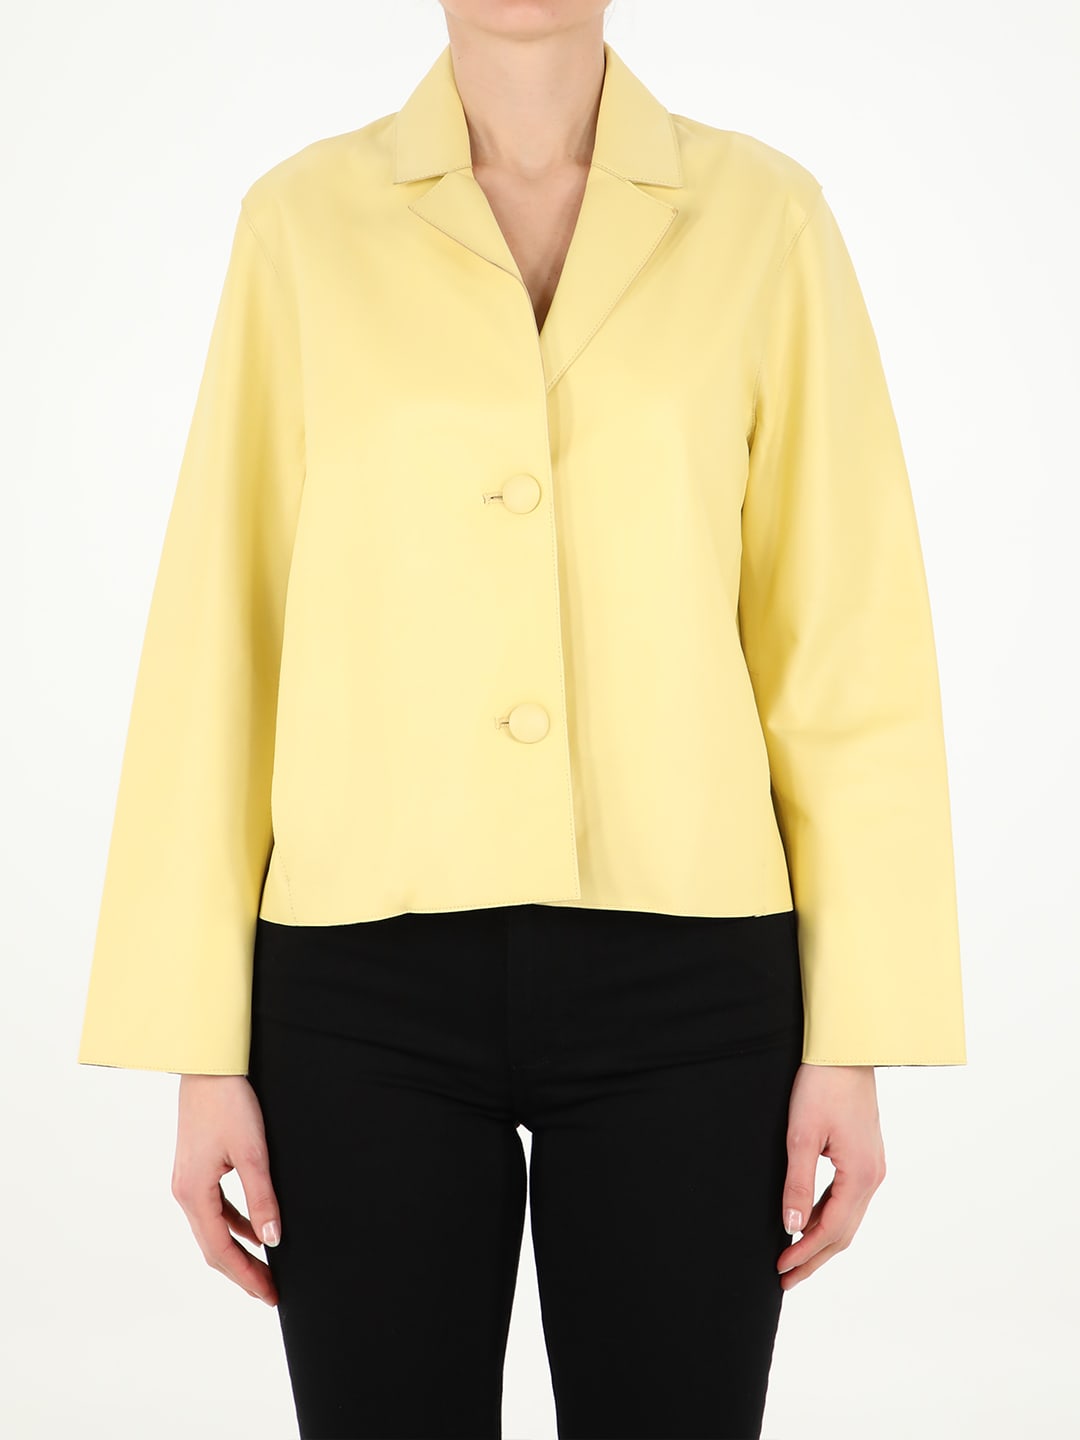 S.W.O.R.D 6.6.44 Yellow Leather Jacket